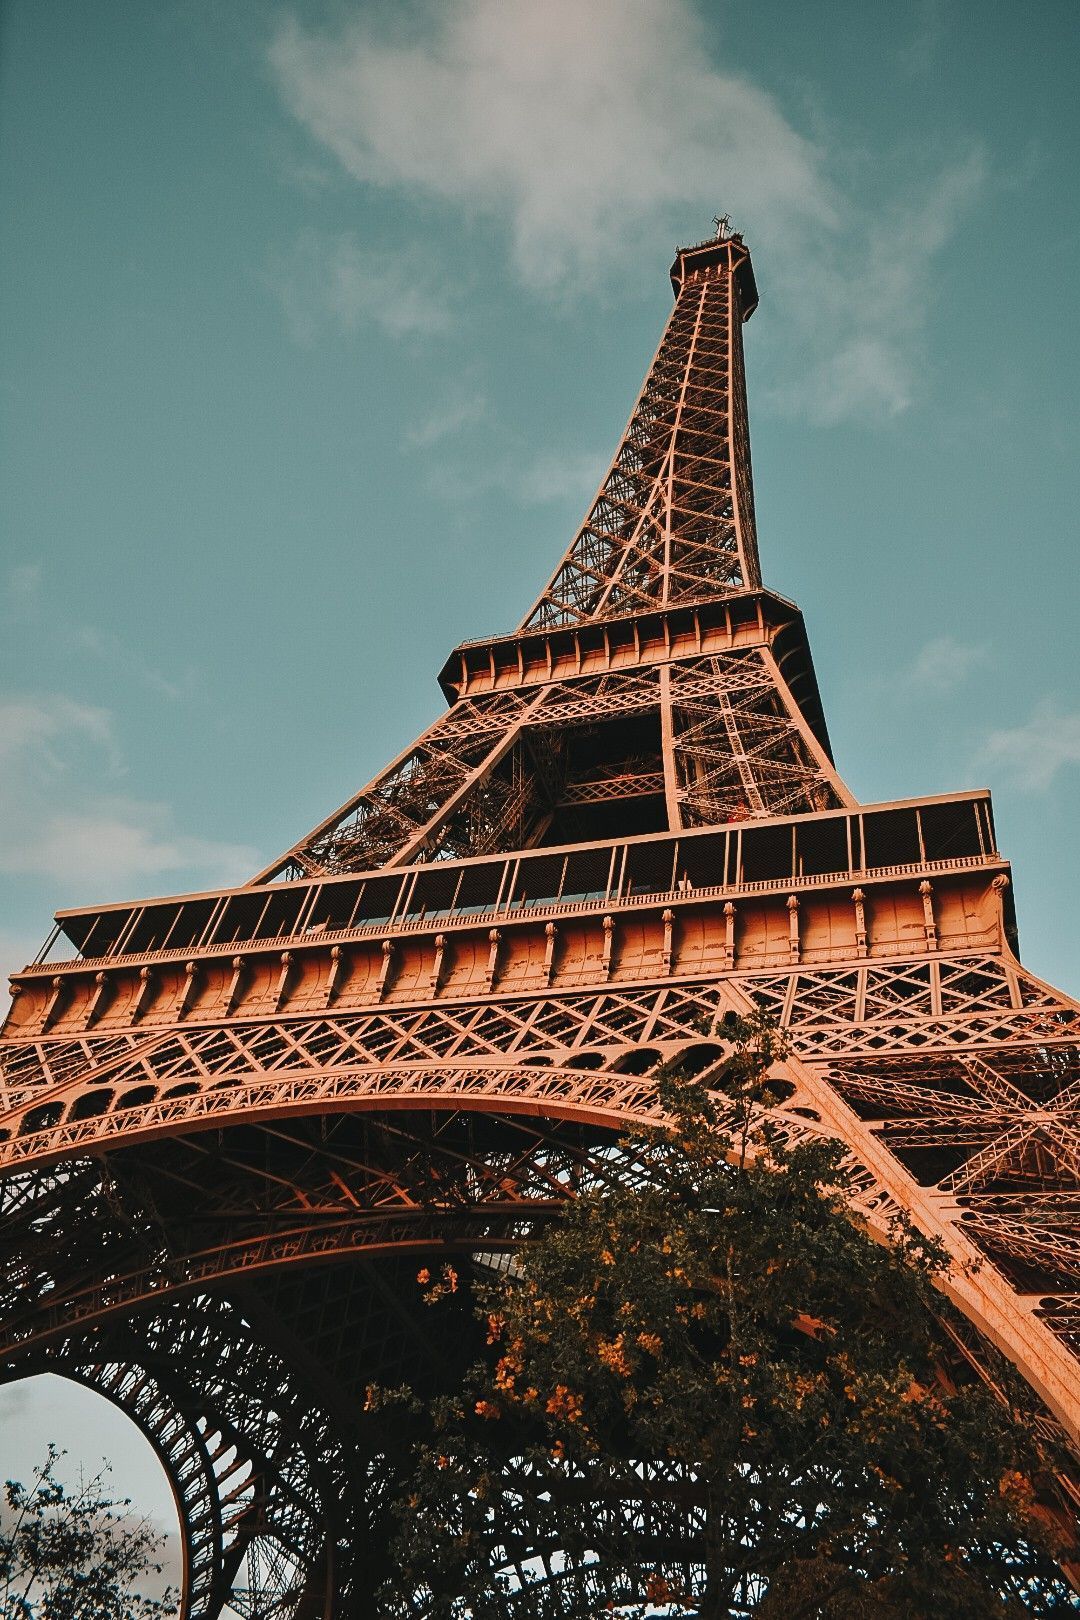 The Eiffel Tower is a wrought iron lattice tower in Paris, France. - Eiffel Tower, Paris